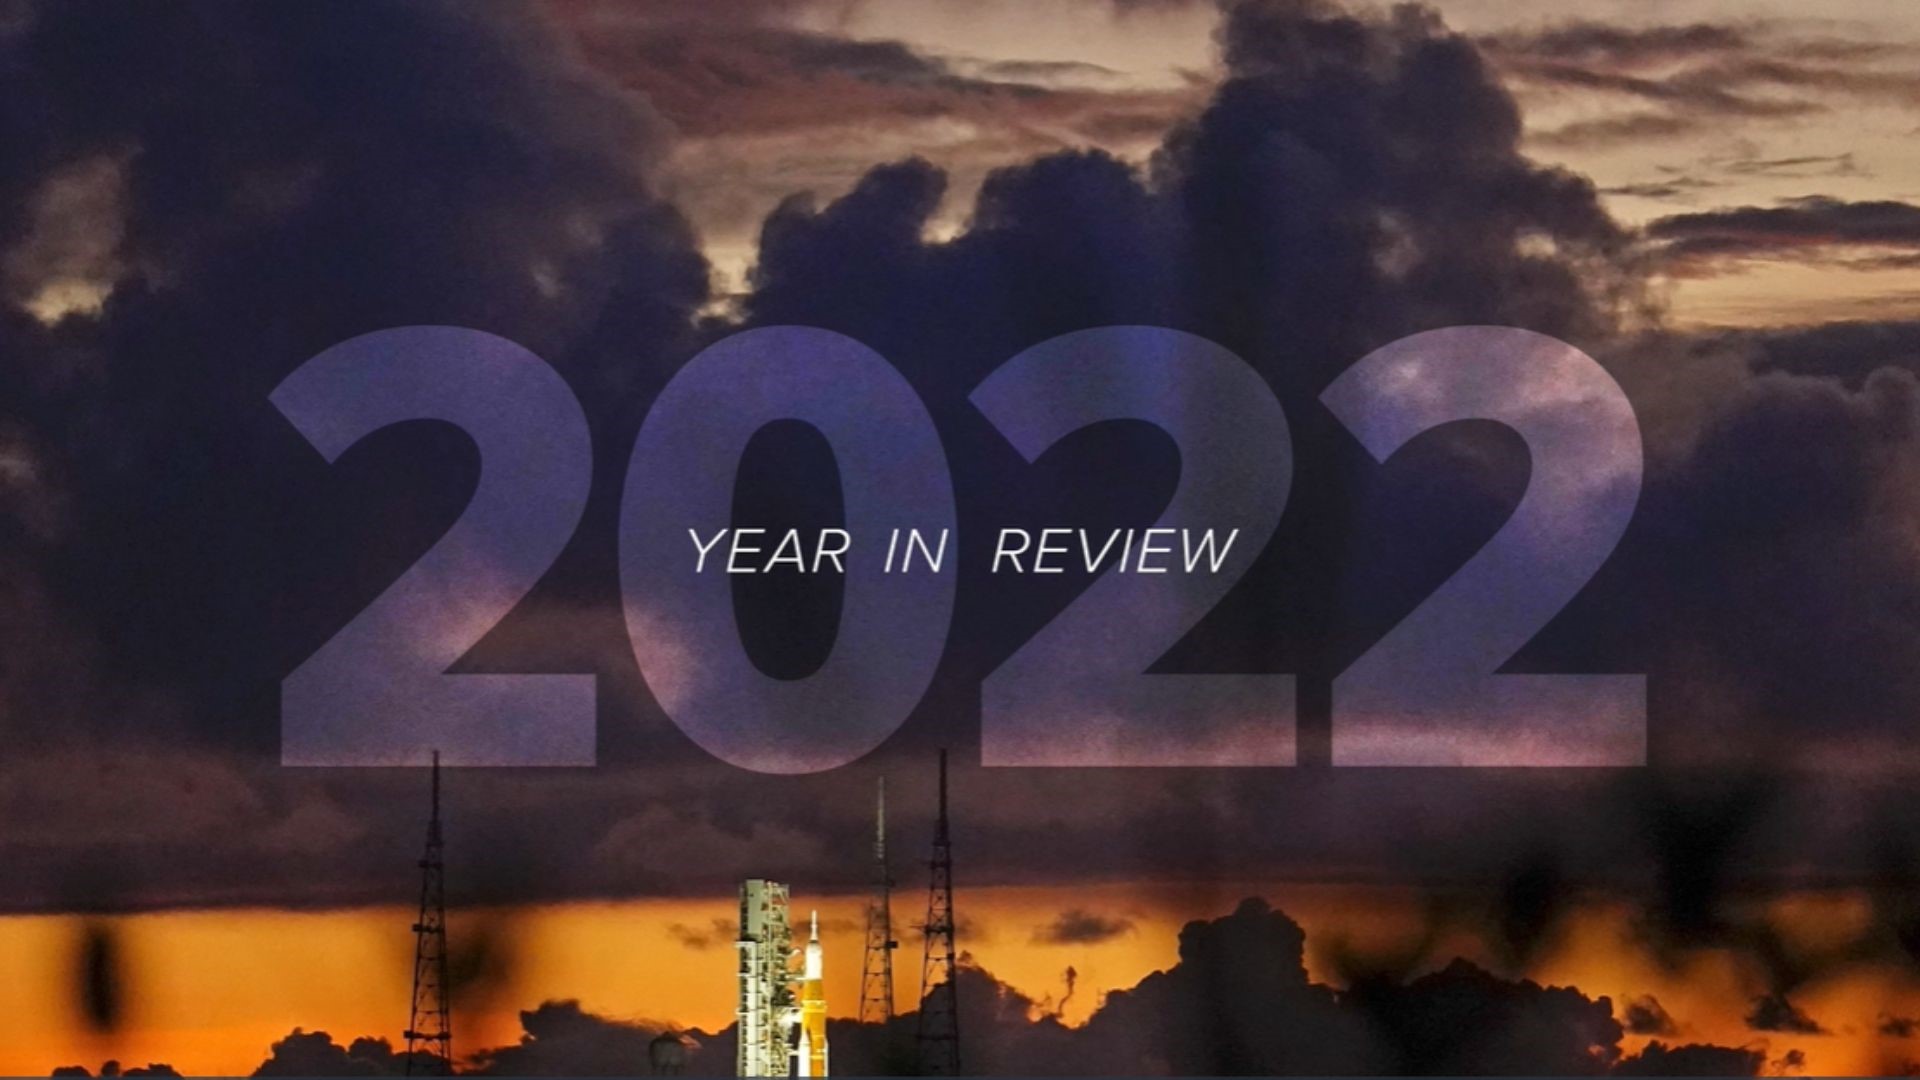 A look back at some of the biggest news and events in 2022.